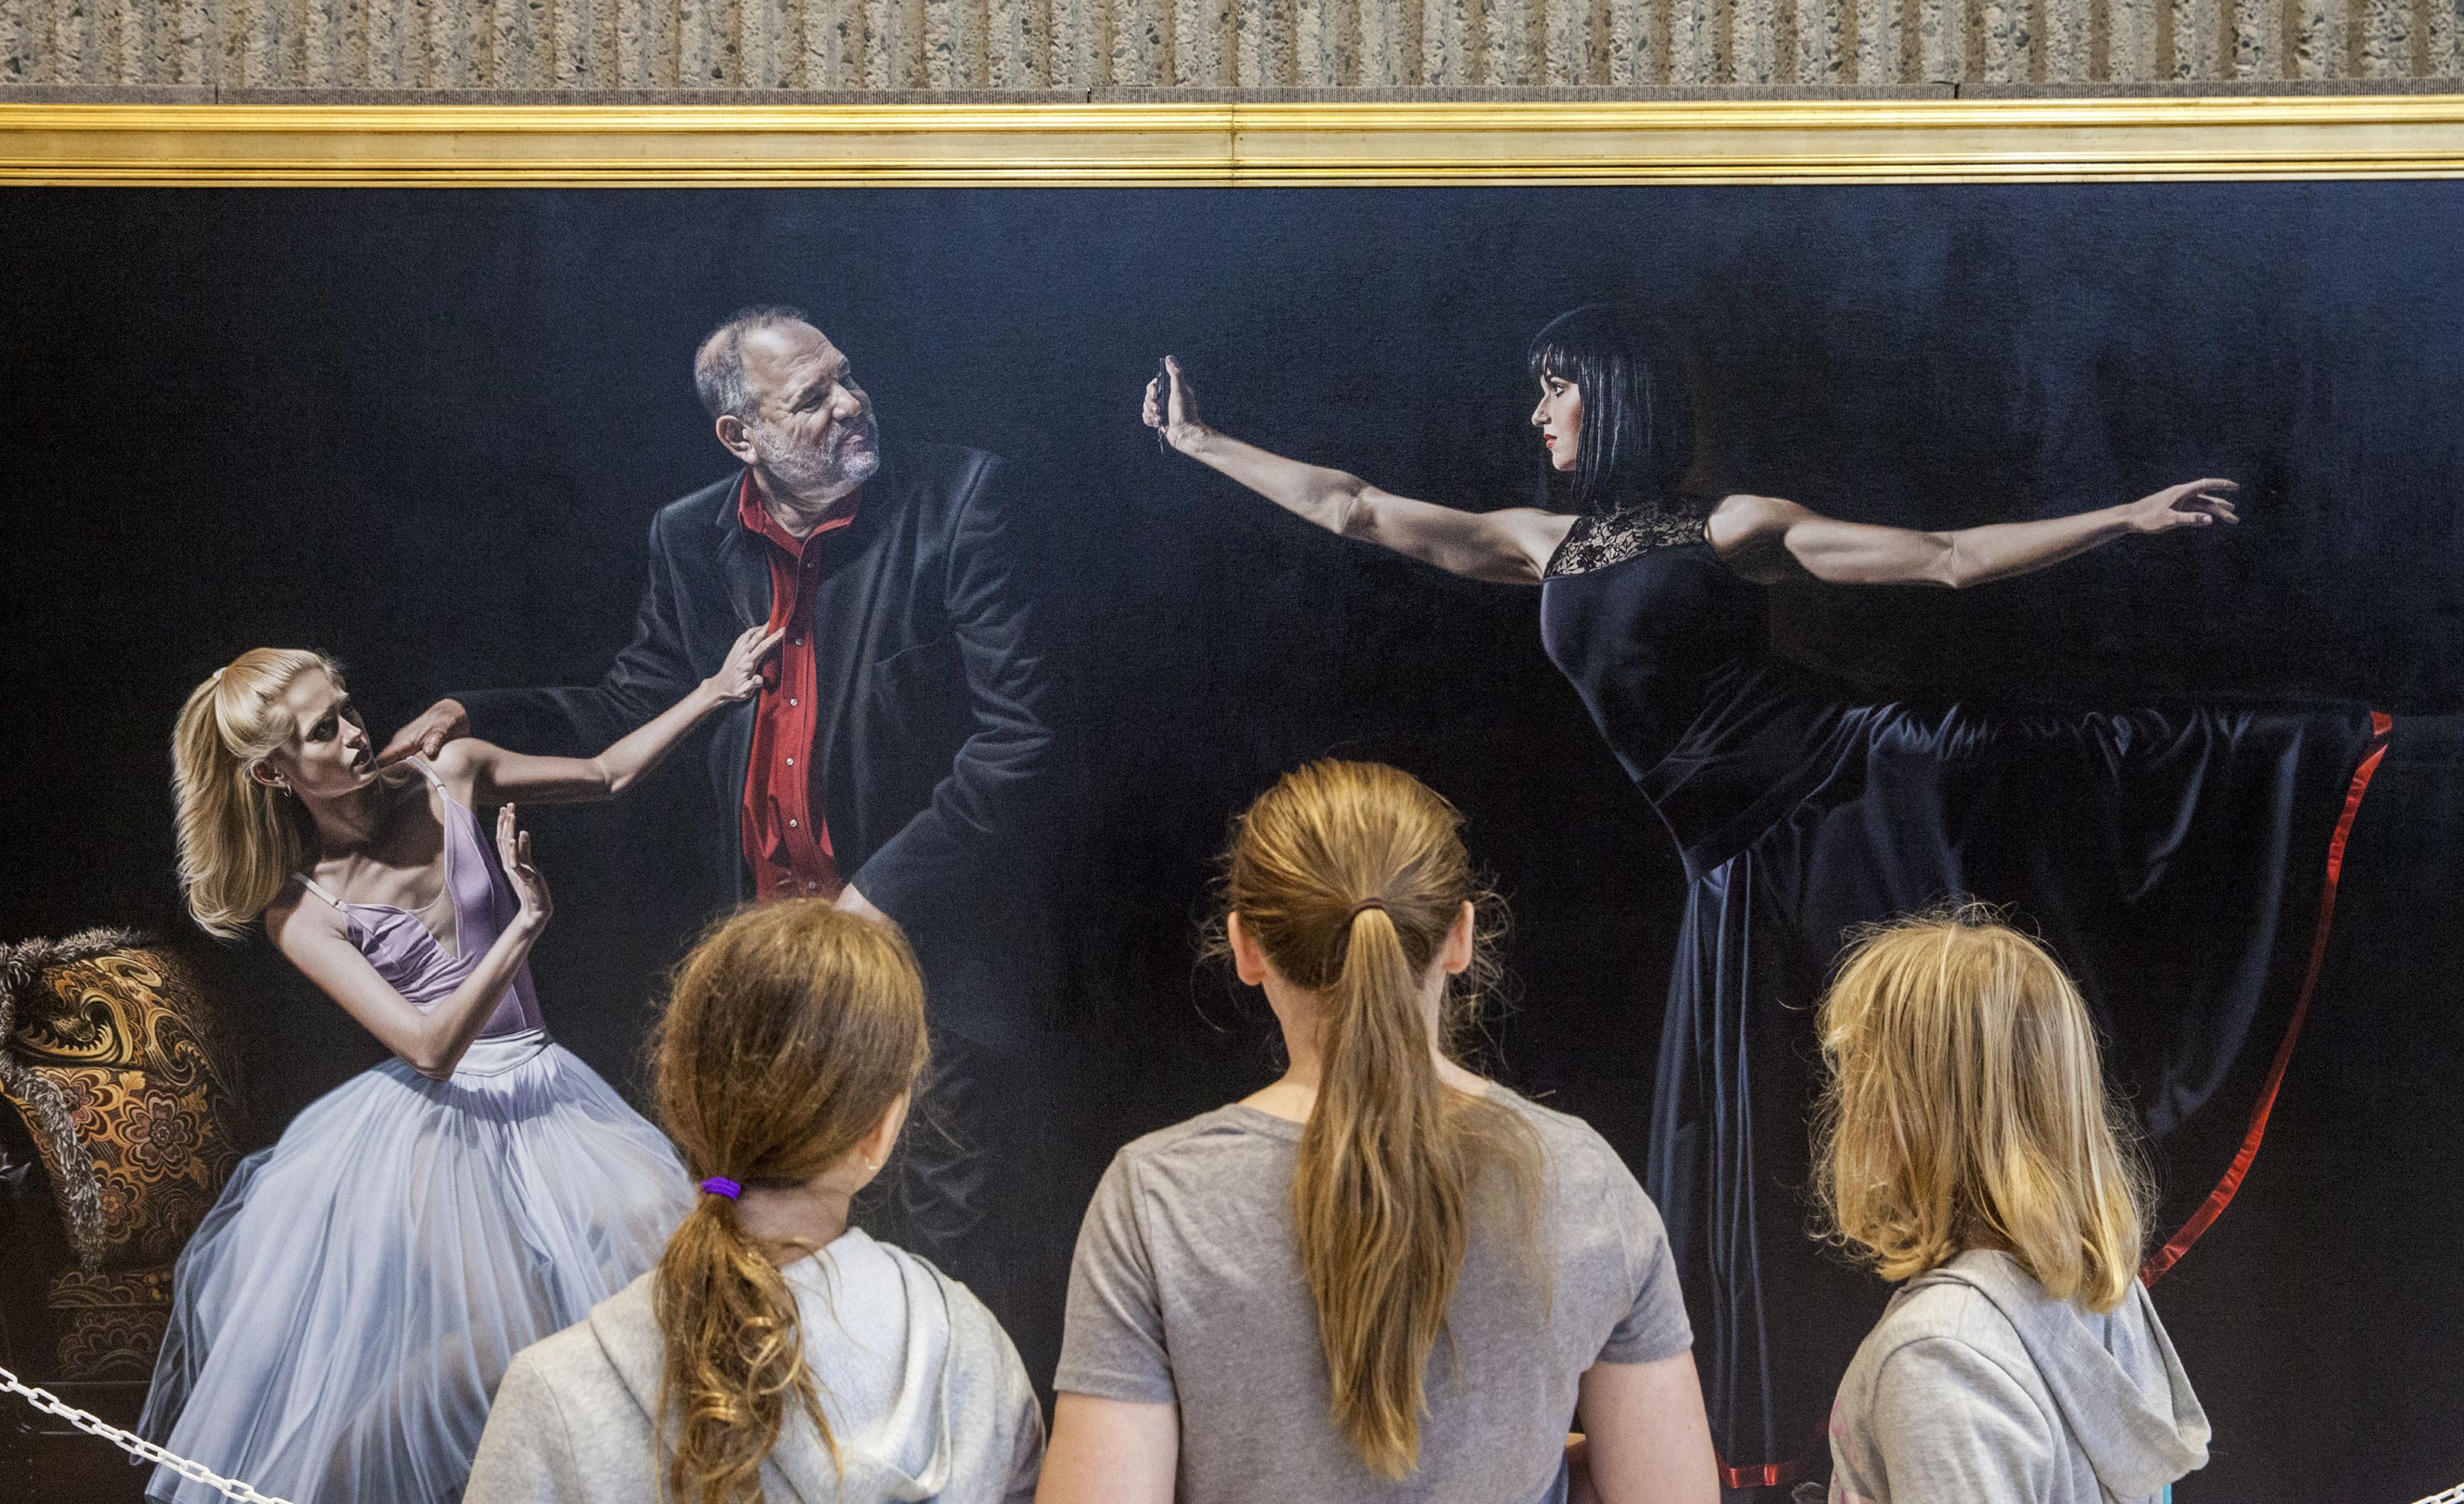 Children look at Kevin Grass' and Michaela Oberlaender's ArtPrize entry "Not #MeToo: No More Casting Couch" at the Gerald R. Ford Presidential Museum in Grand Rapids on Wednesday, Sept. 19, 2018. The work is about sexual harassment in America. According to the artwork's description: "It shows one ballerina rebuffing Harvey Weinstein, while the other one is ready to pepper spray him. These ballerinas are not comfortable with the idea of the 'casting couch.' The Harvey Weinstein scandal began the #MeToo movement that is changing what is considered acceptable behavior between individuals. The piece shows women empowered to fight back against sexual abuses." Cory Morse | MLive.com